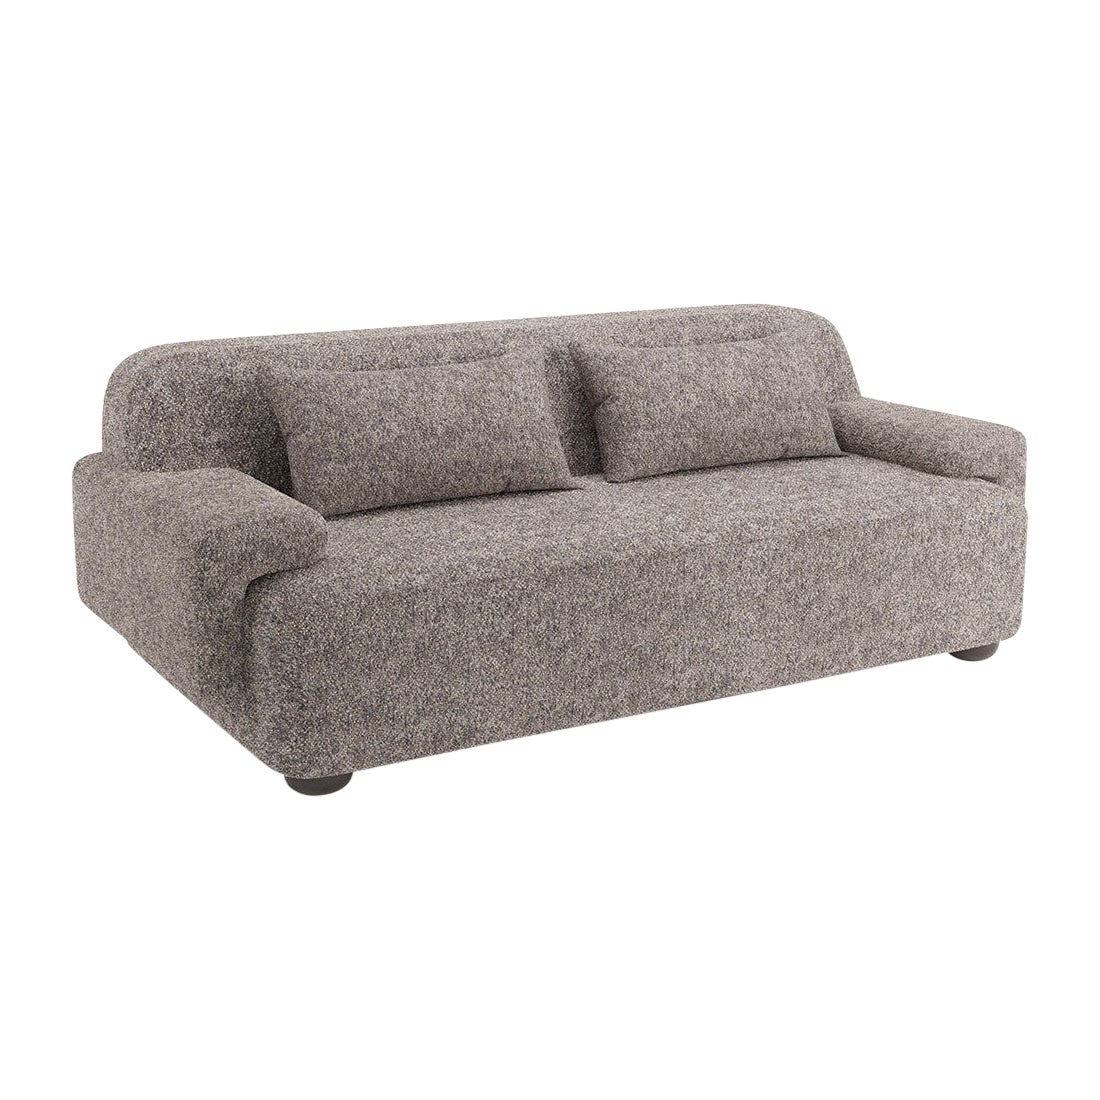 Popus Editions Lena 3 Seater Sofa in Anthracite Antwerp Linen Upholstery For Sale